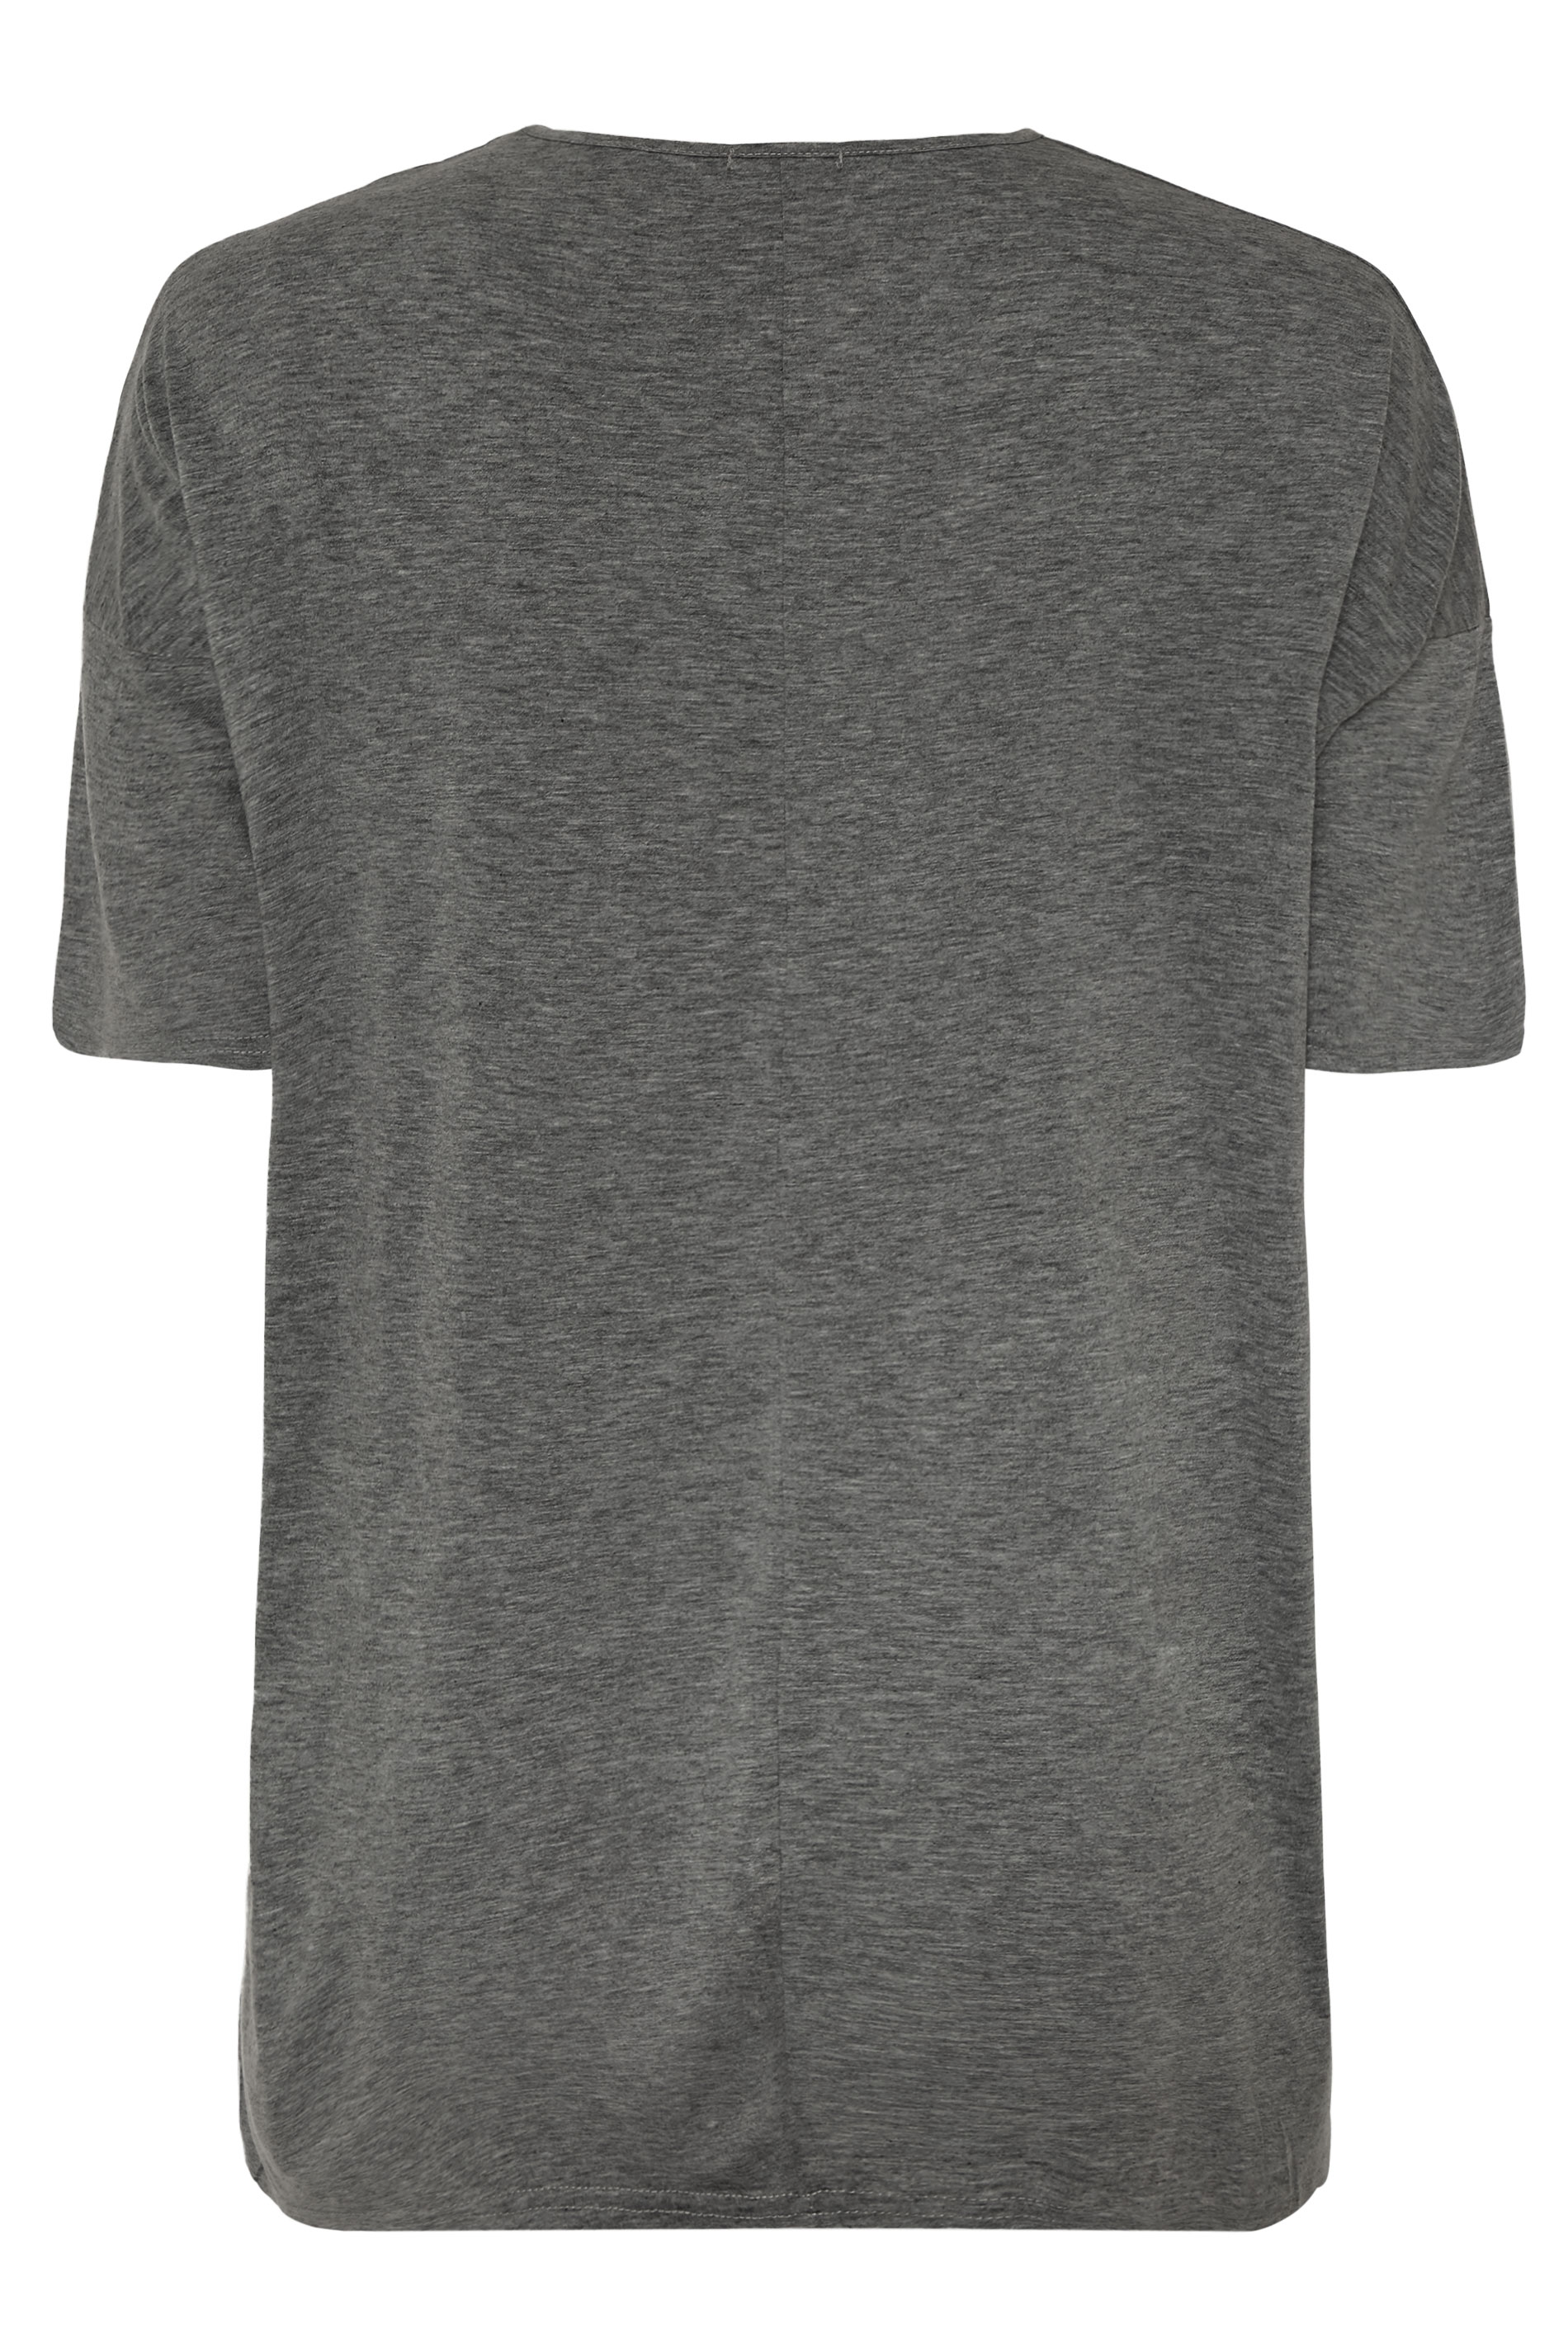 Charcoal Grey Jersey Oversized T-Shirt | Yours Clothing